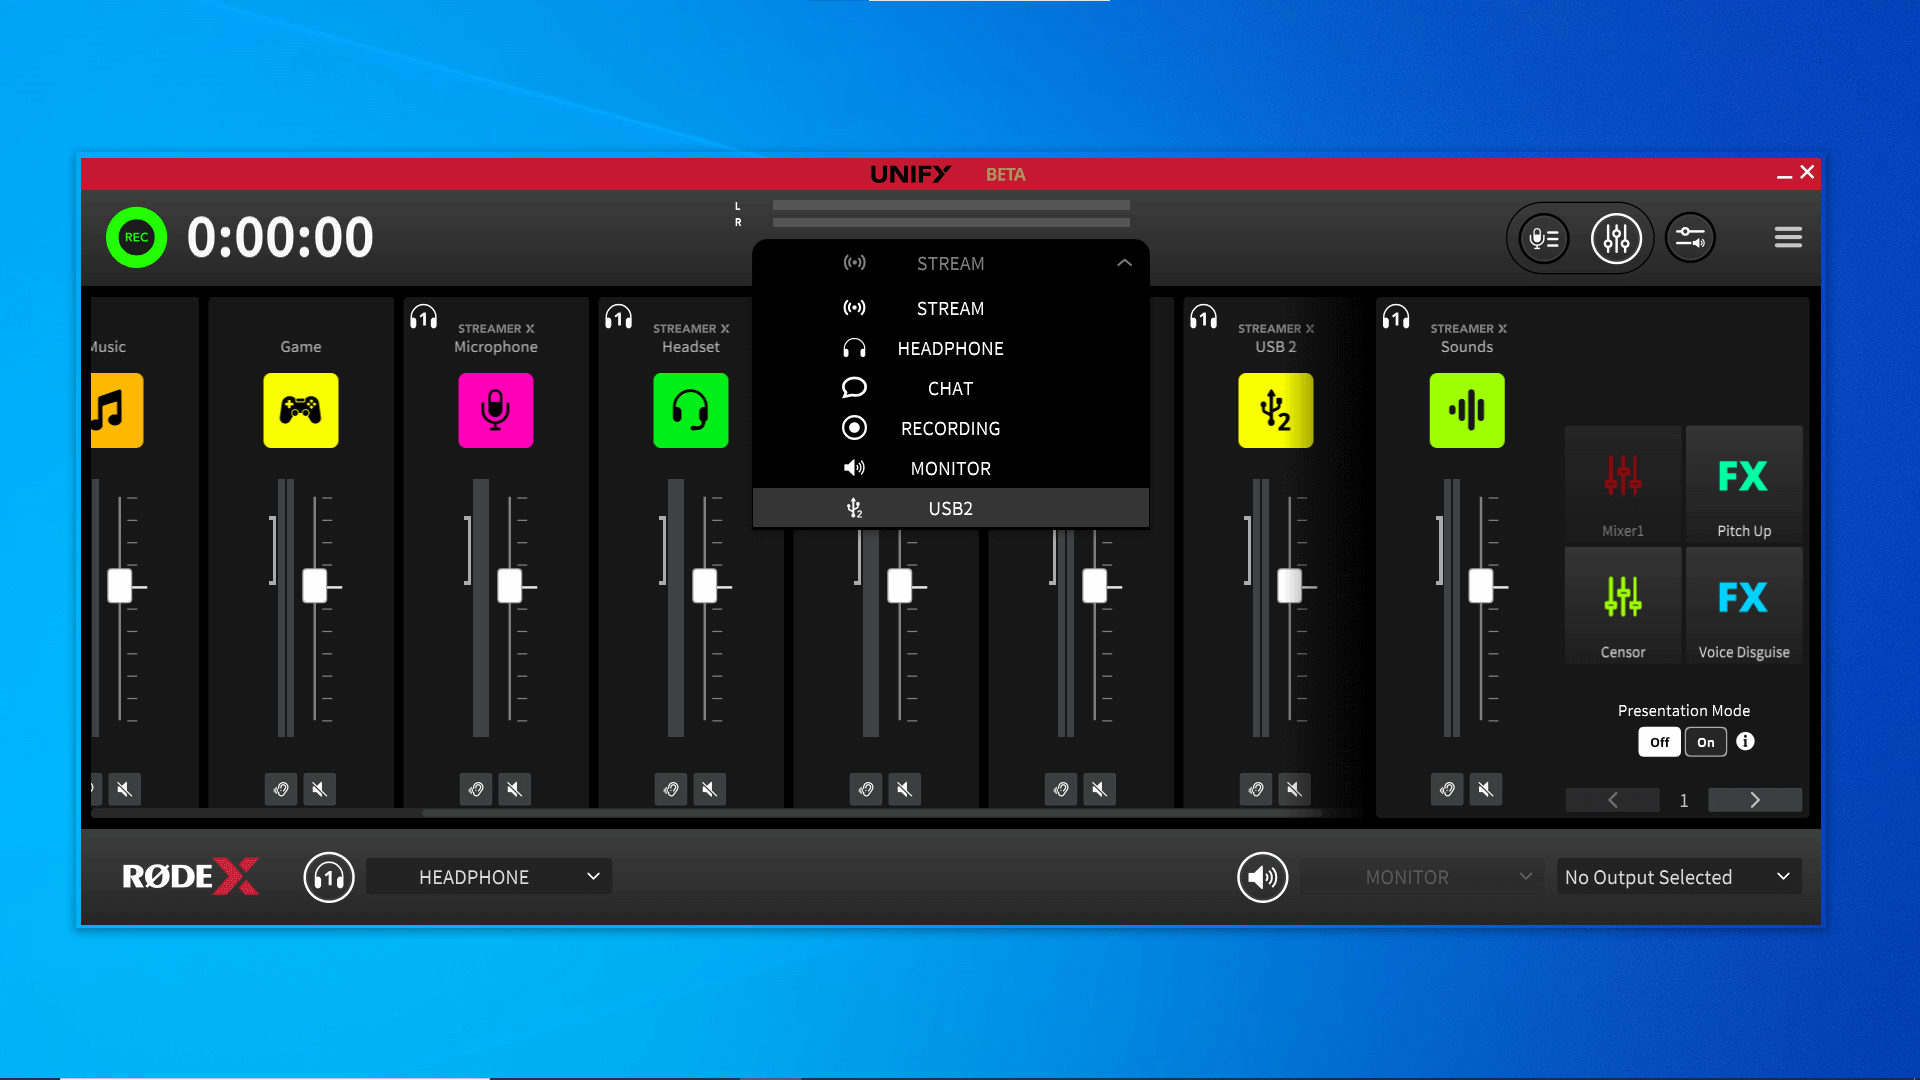 UNIFY showing Streamer X outputs